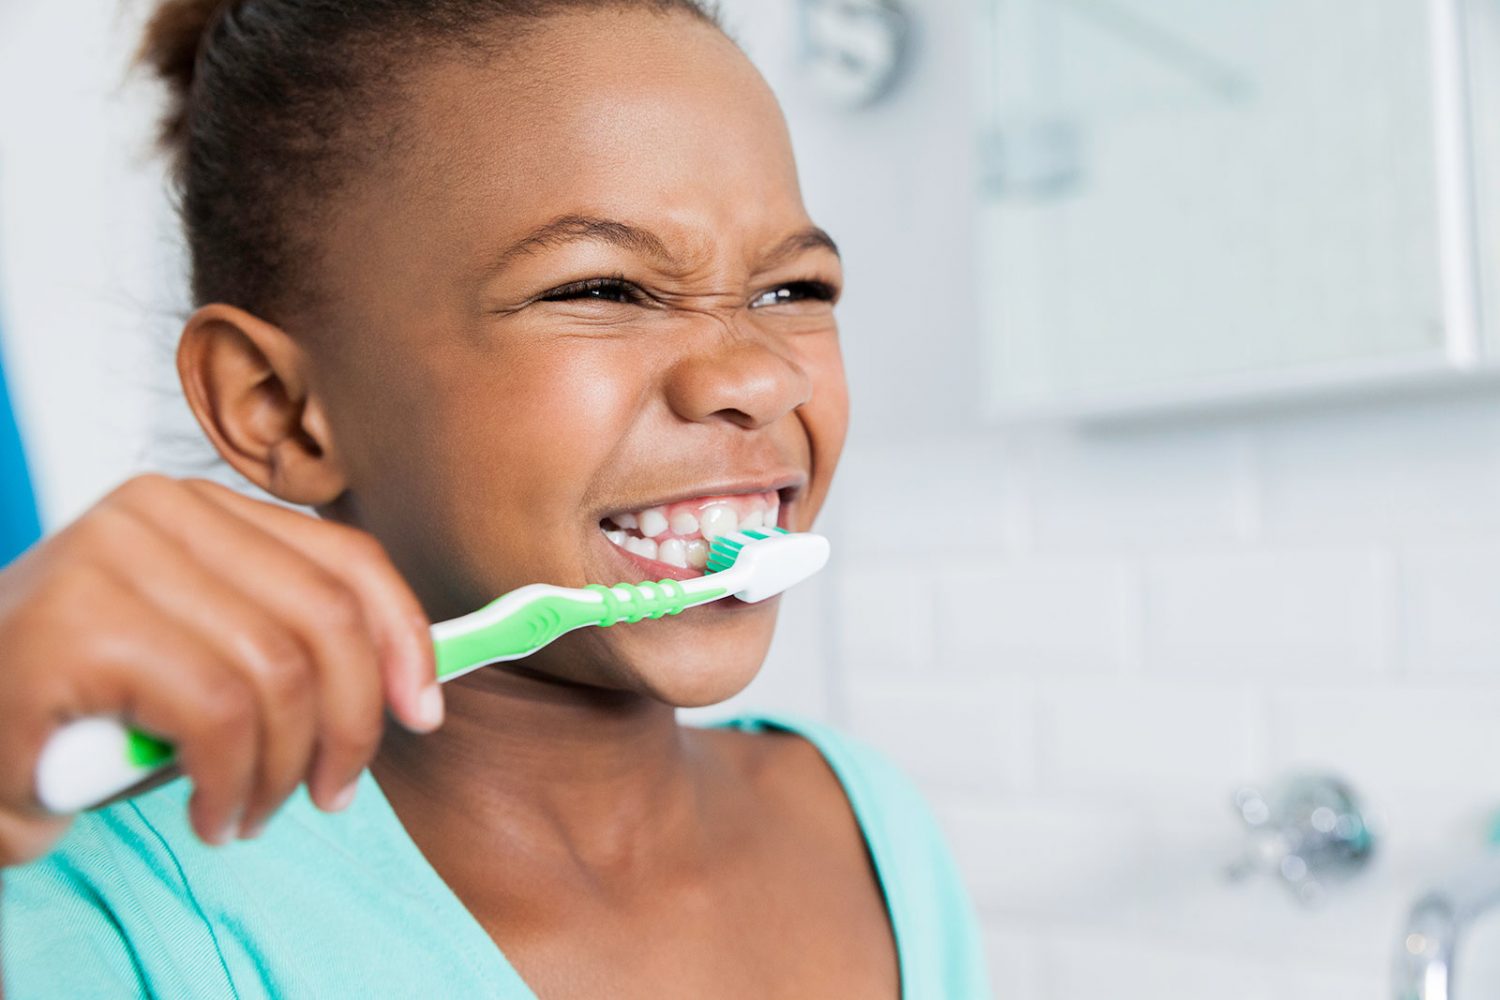 Child brushes teeth before dental clinic